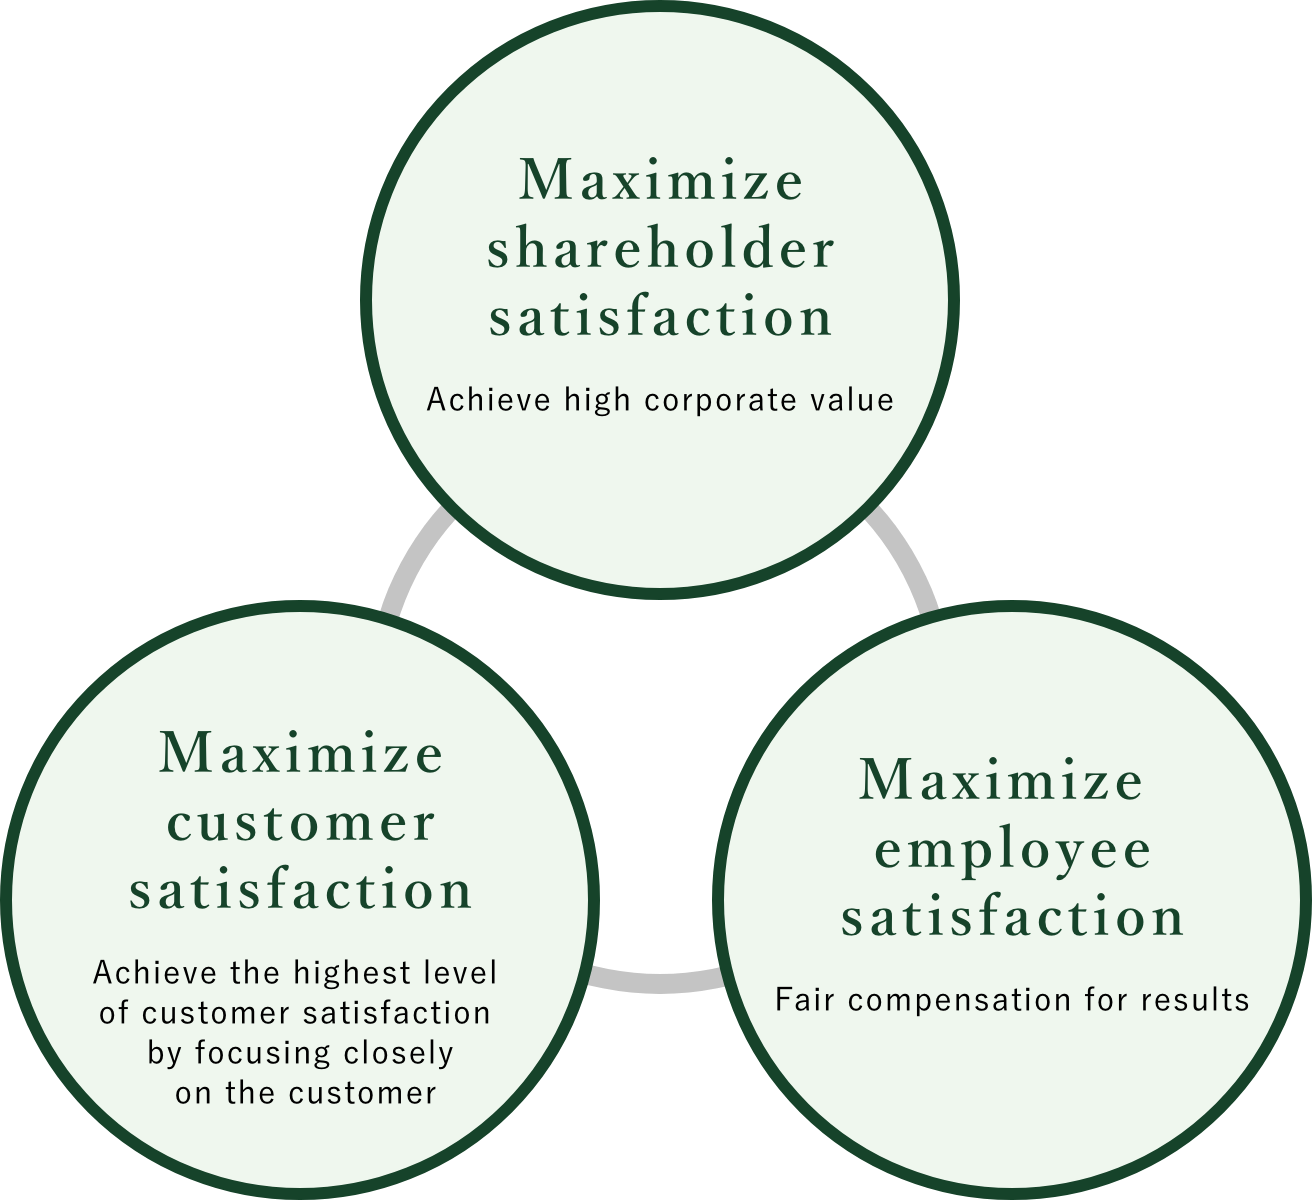 Maximize shareholder satisfaction: Achieve high corporate value / Maximize customer satisfaction: Achieve the highest level of customer satisfaction by focusing closely on the customer / Maximize employee satisfaction: Fair compensation for results